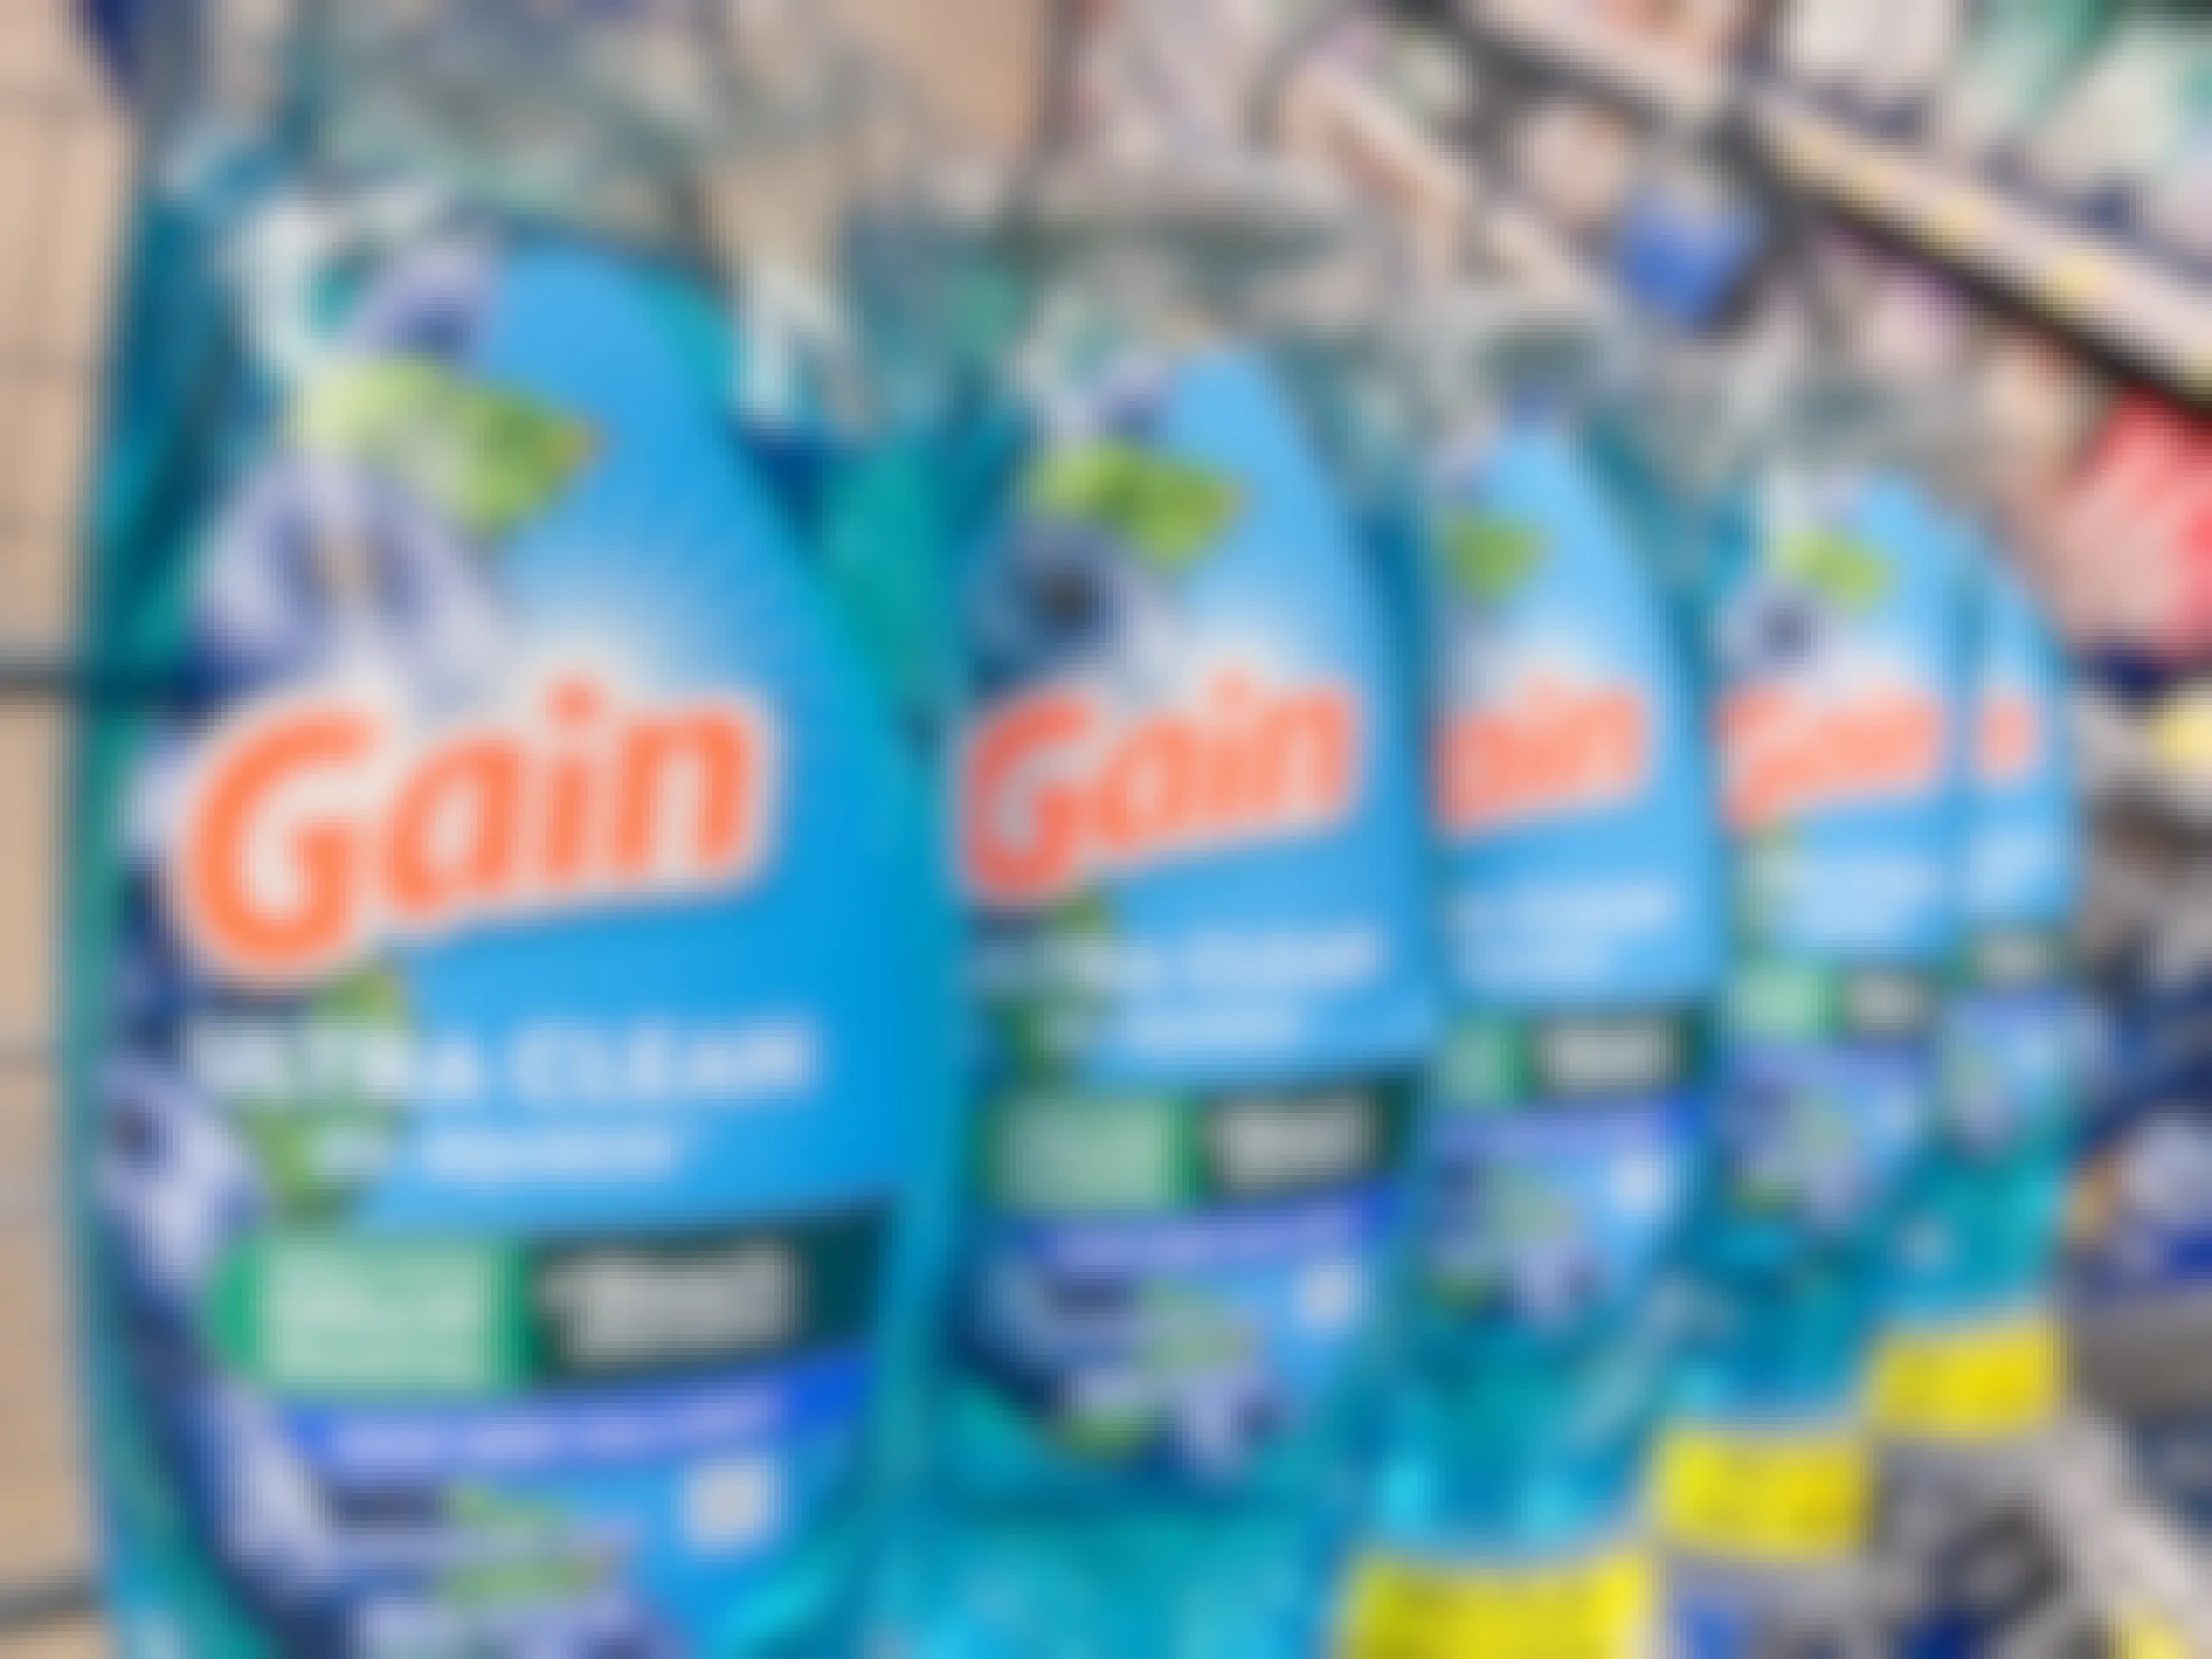 Several Gain Ultra Clean EZ Squeeze bottles sitting in a store cart.